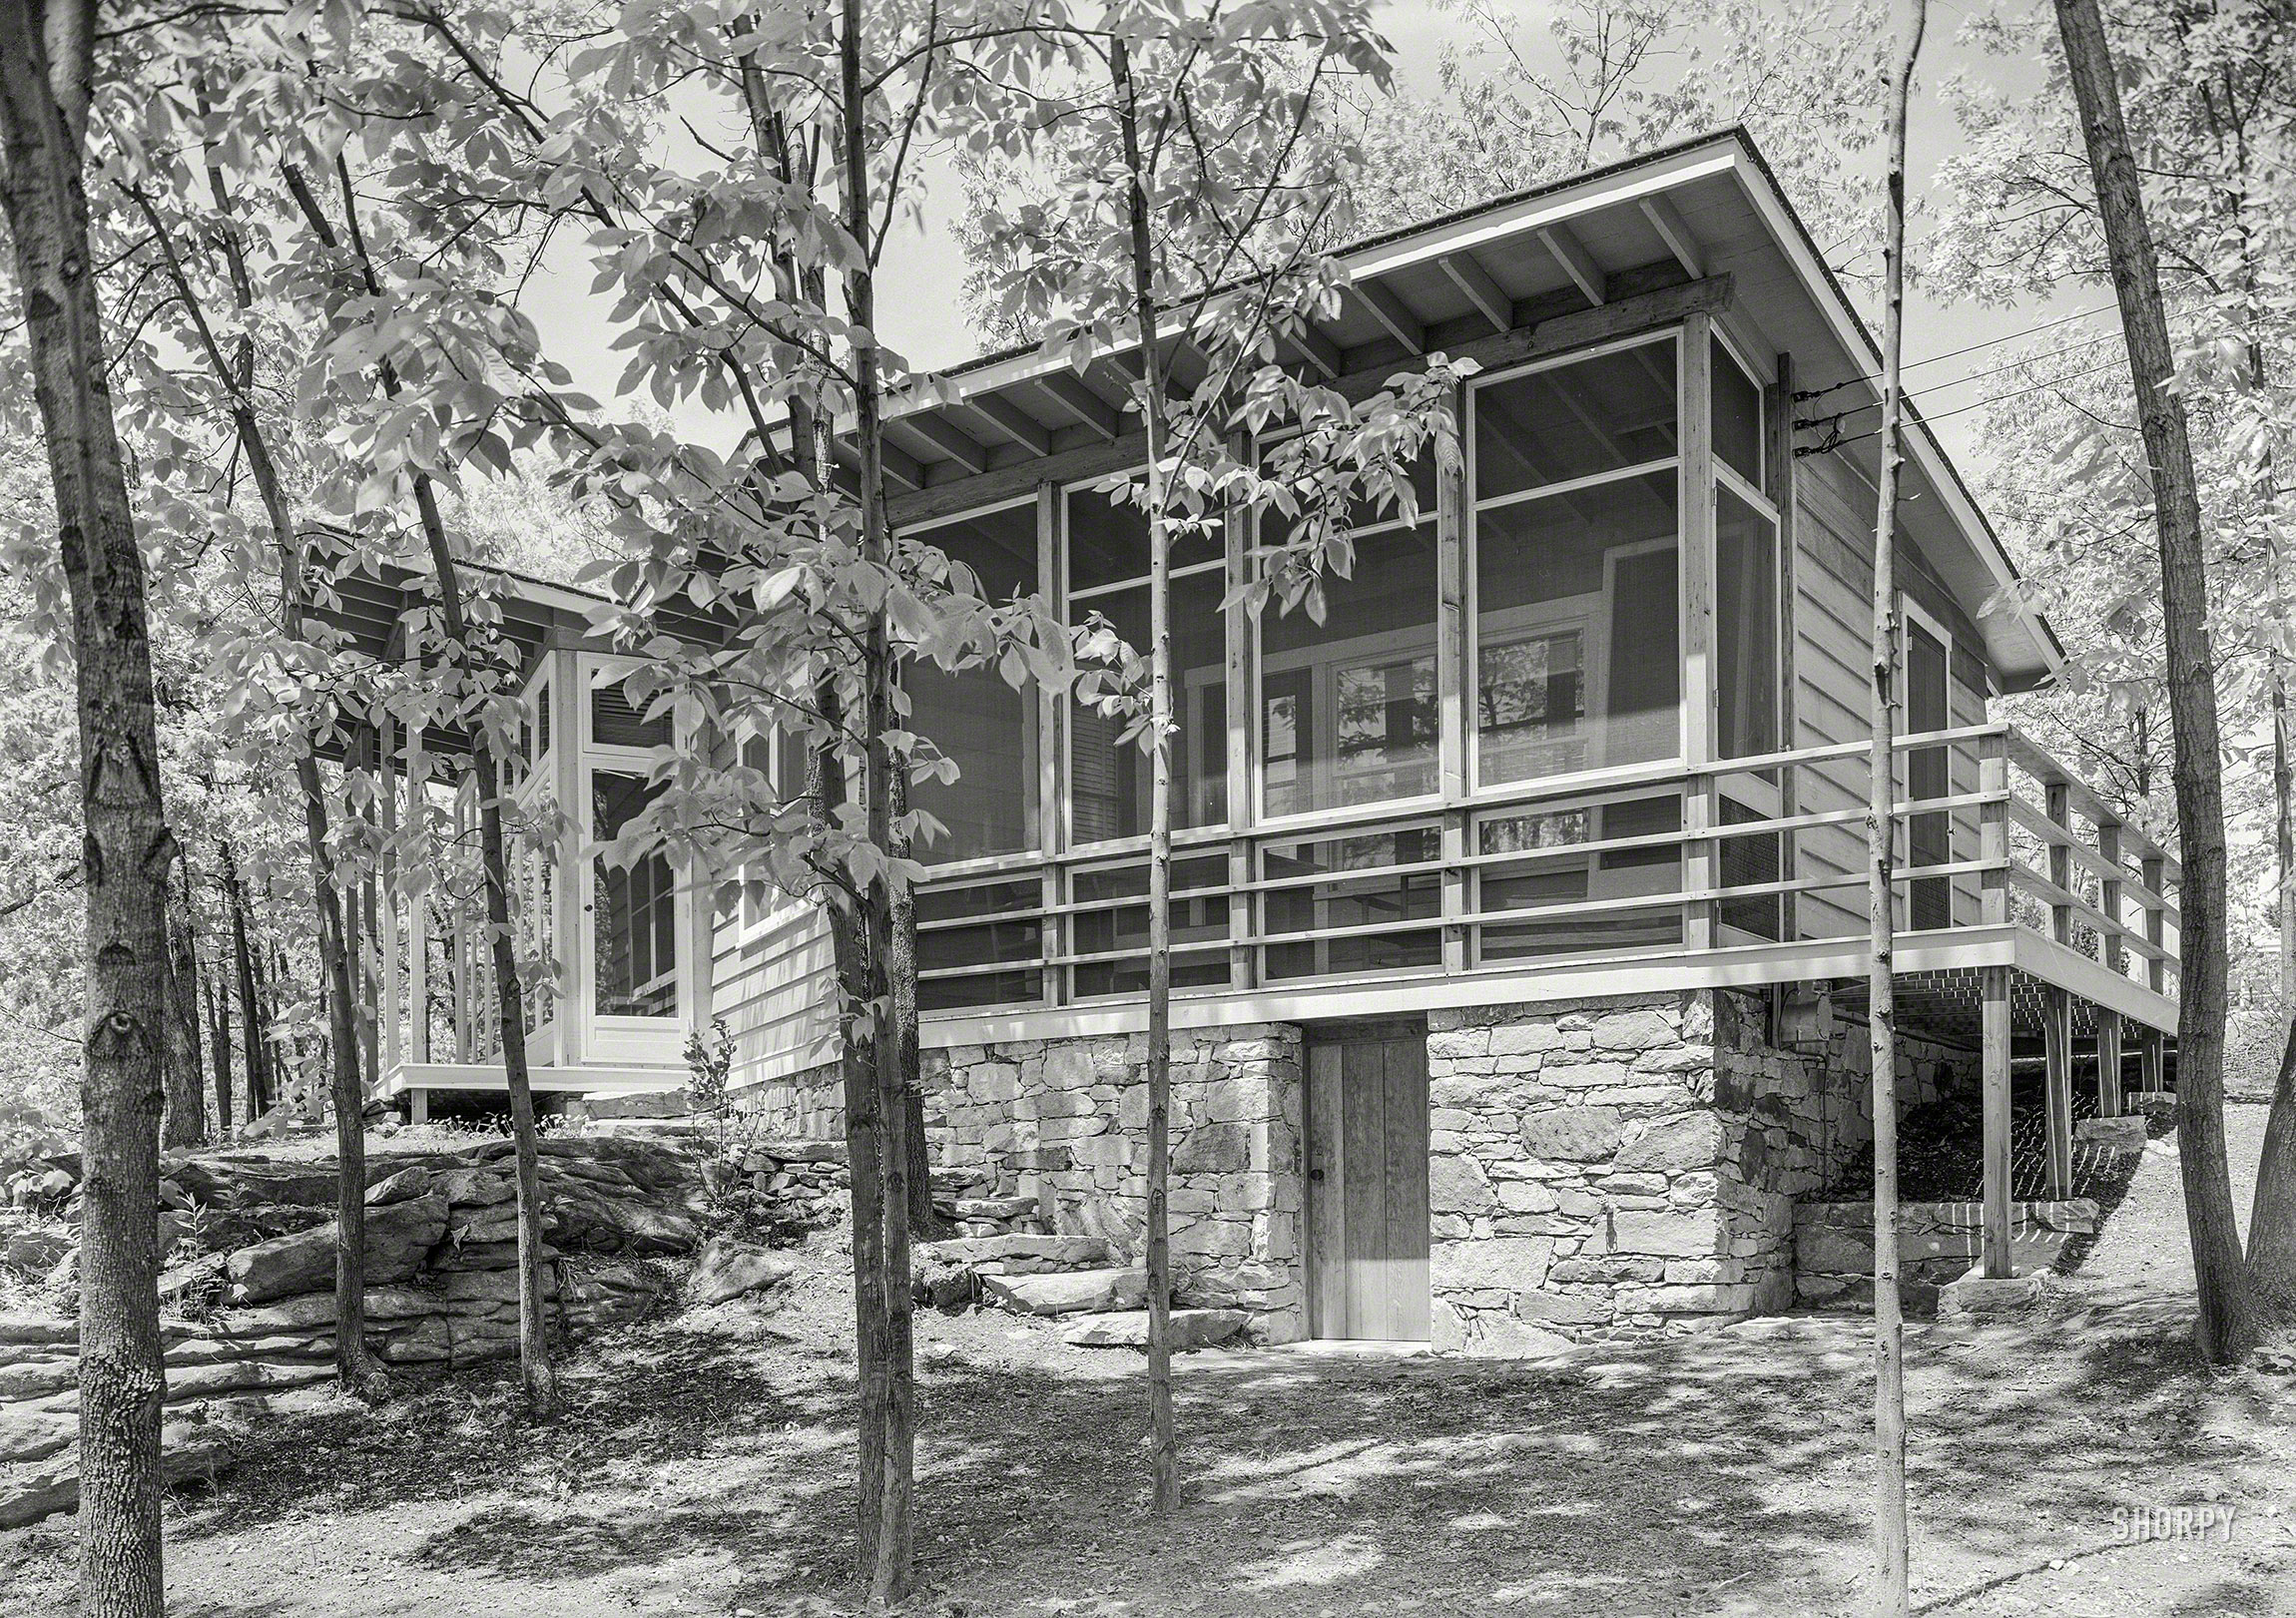 May 30, 1940. "John C.B. Moore residence in Pound Ridge, Westchester County, N.Y. Rear facade. Moore & Hutchins, architect." Neighbor to Bertram Willcox, whose house he also designed. Gottscho-Schleisner photo. View full size.